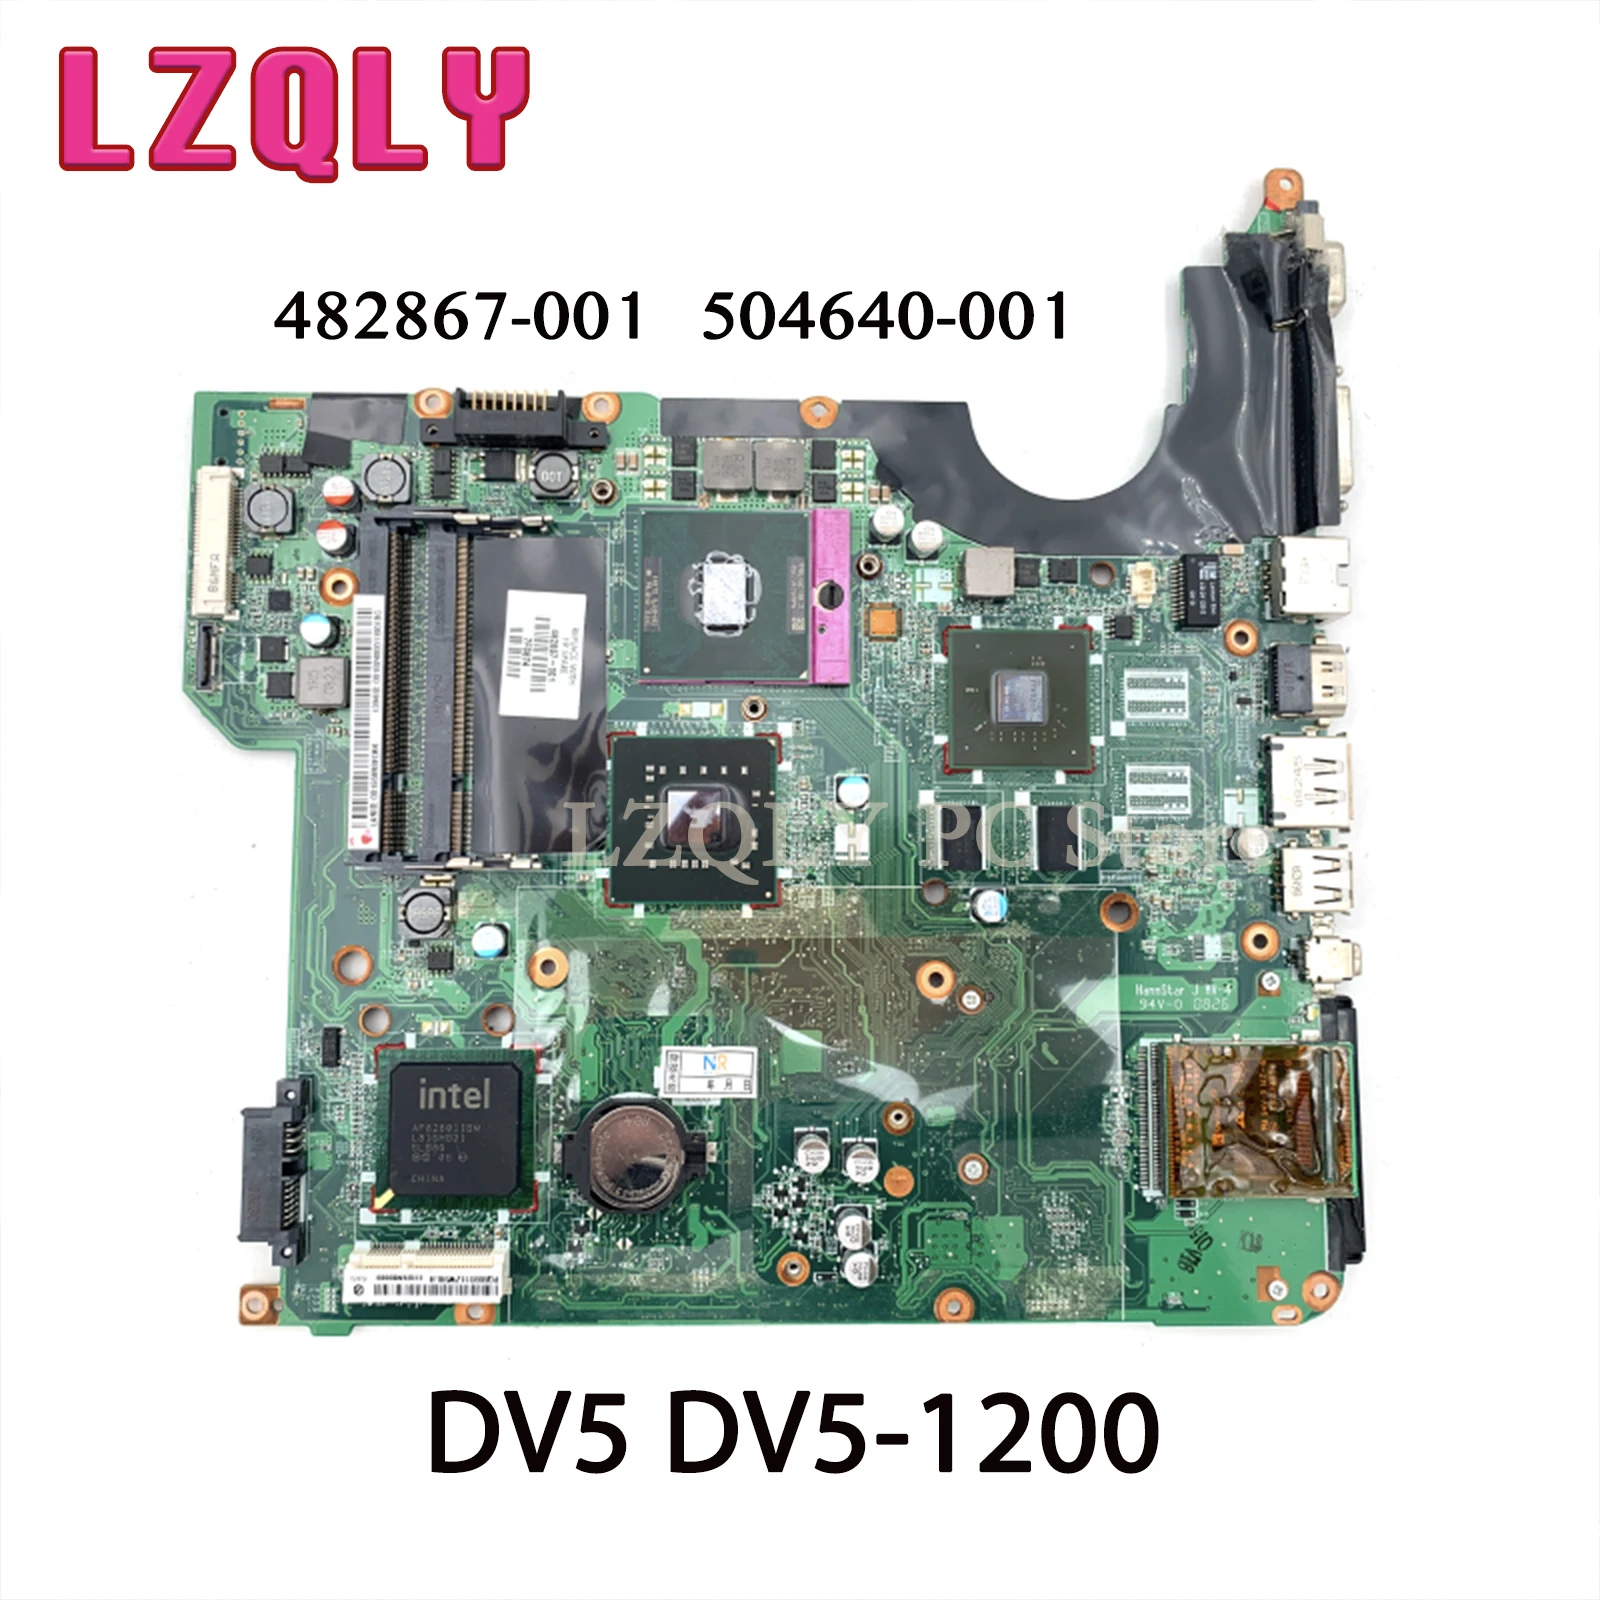 

LZQLY For HP Pavilion DV5 DV5-1200 482867-001 504640-001 Laptop Motherboard MAIN BOARD PM45 DDR2 Free CPU Full Tested